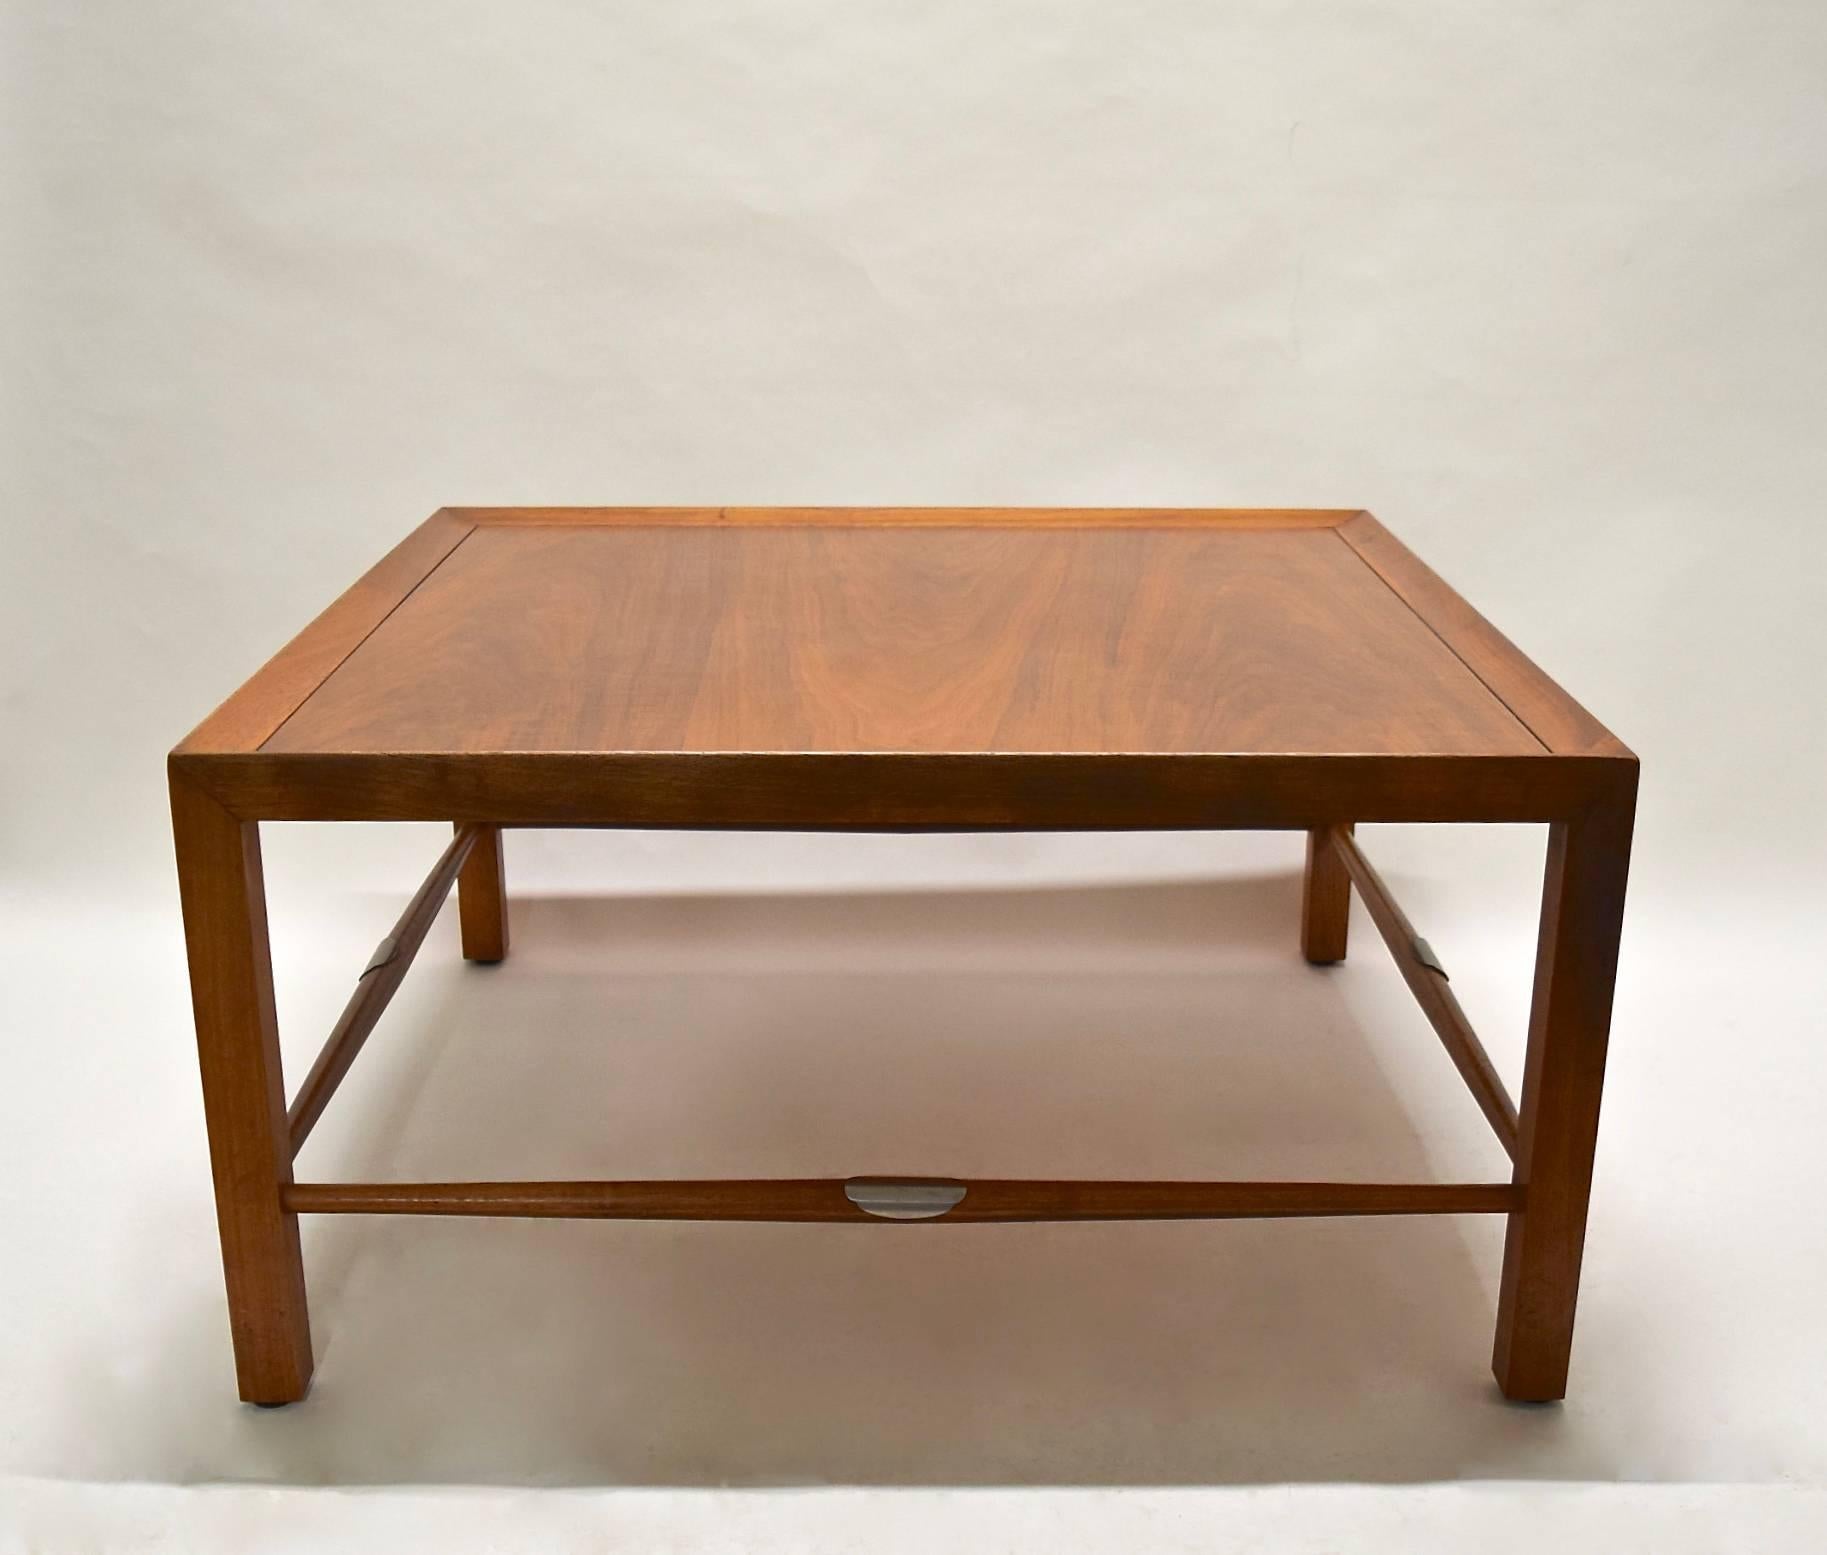 Walnut coffee table made by Heritage Henredon with four tapering wood stretchers that each have a curved metal detail in the center. The table has the original stampings on the underside of the top.